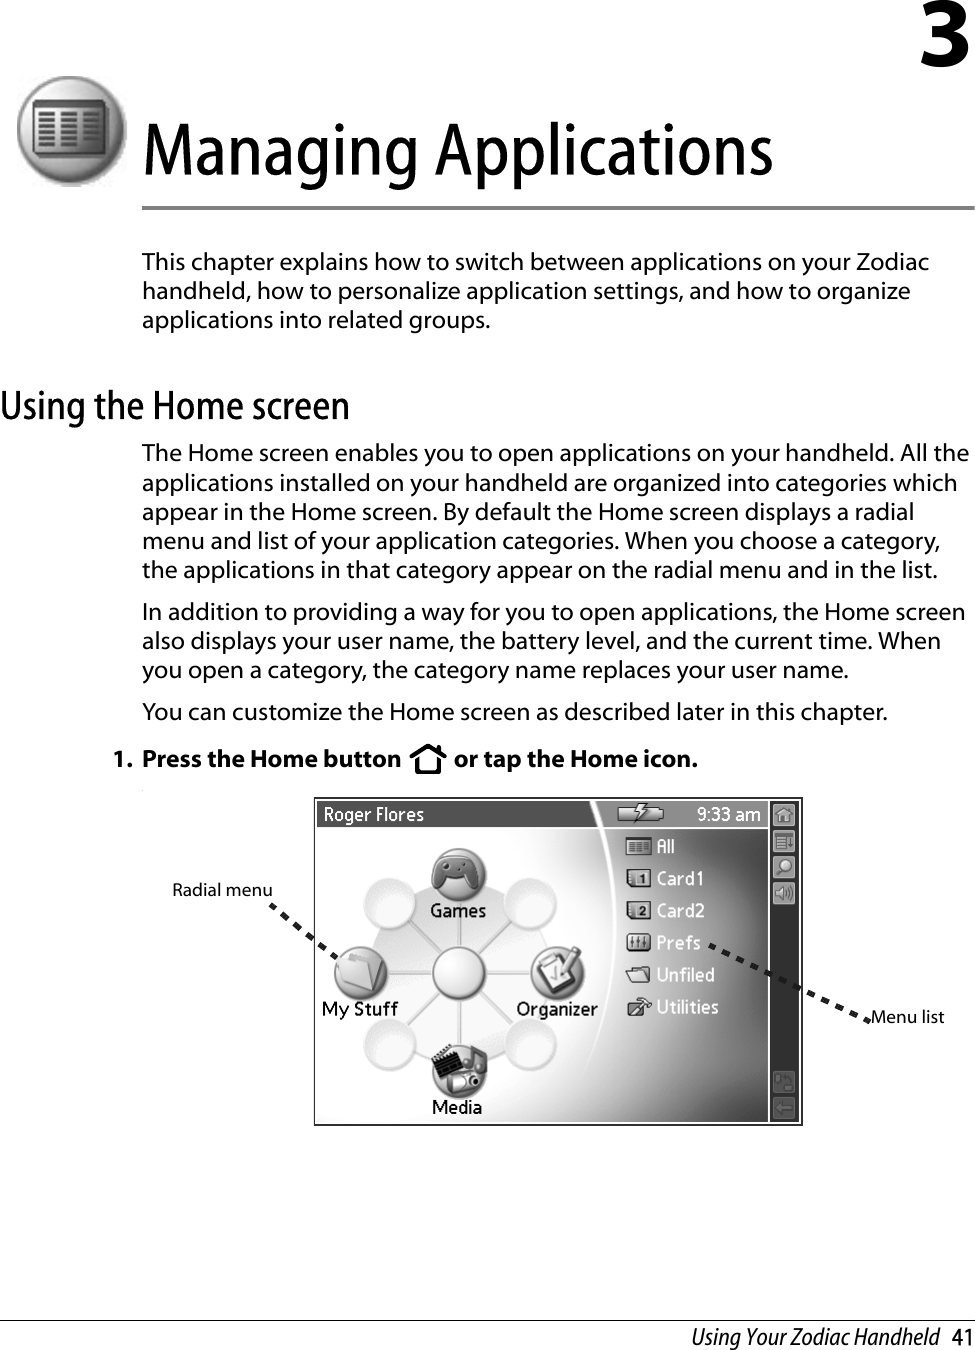 Using Your Zodiac Handheld   413Managing ApplicationsThis chapter explains how to switch between applications on your Zodiac handheld, how to personalize application settings, and how to organize applications into related groups. Using the Home screenThe Home screen enables you to open applications on your handheld. All the applications installed on your handheld are organized into categories which appear in the Home screen. By default the Home screen displays a radial menu and list of your application categories. When you choose a category, the applications in that category appear on the radial menu and in the list.In addition to providing a way for you to open applications, the Home screen also displays your user name, the battery level, and the current time. When you open a category, the category name replaces your user name.You can customize the Home screen as described later in this chapter.1. Press the Home button   or tap the Home icon. .Radial menuMenu list